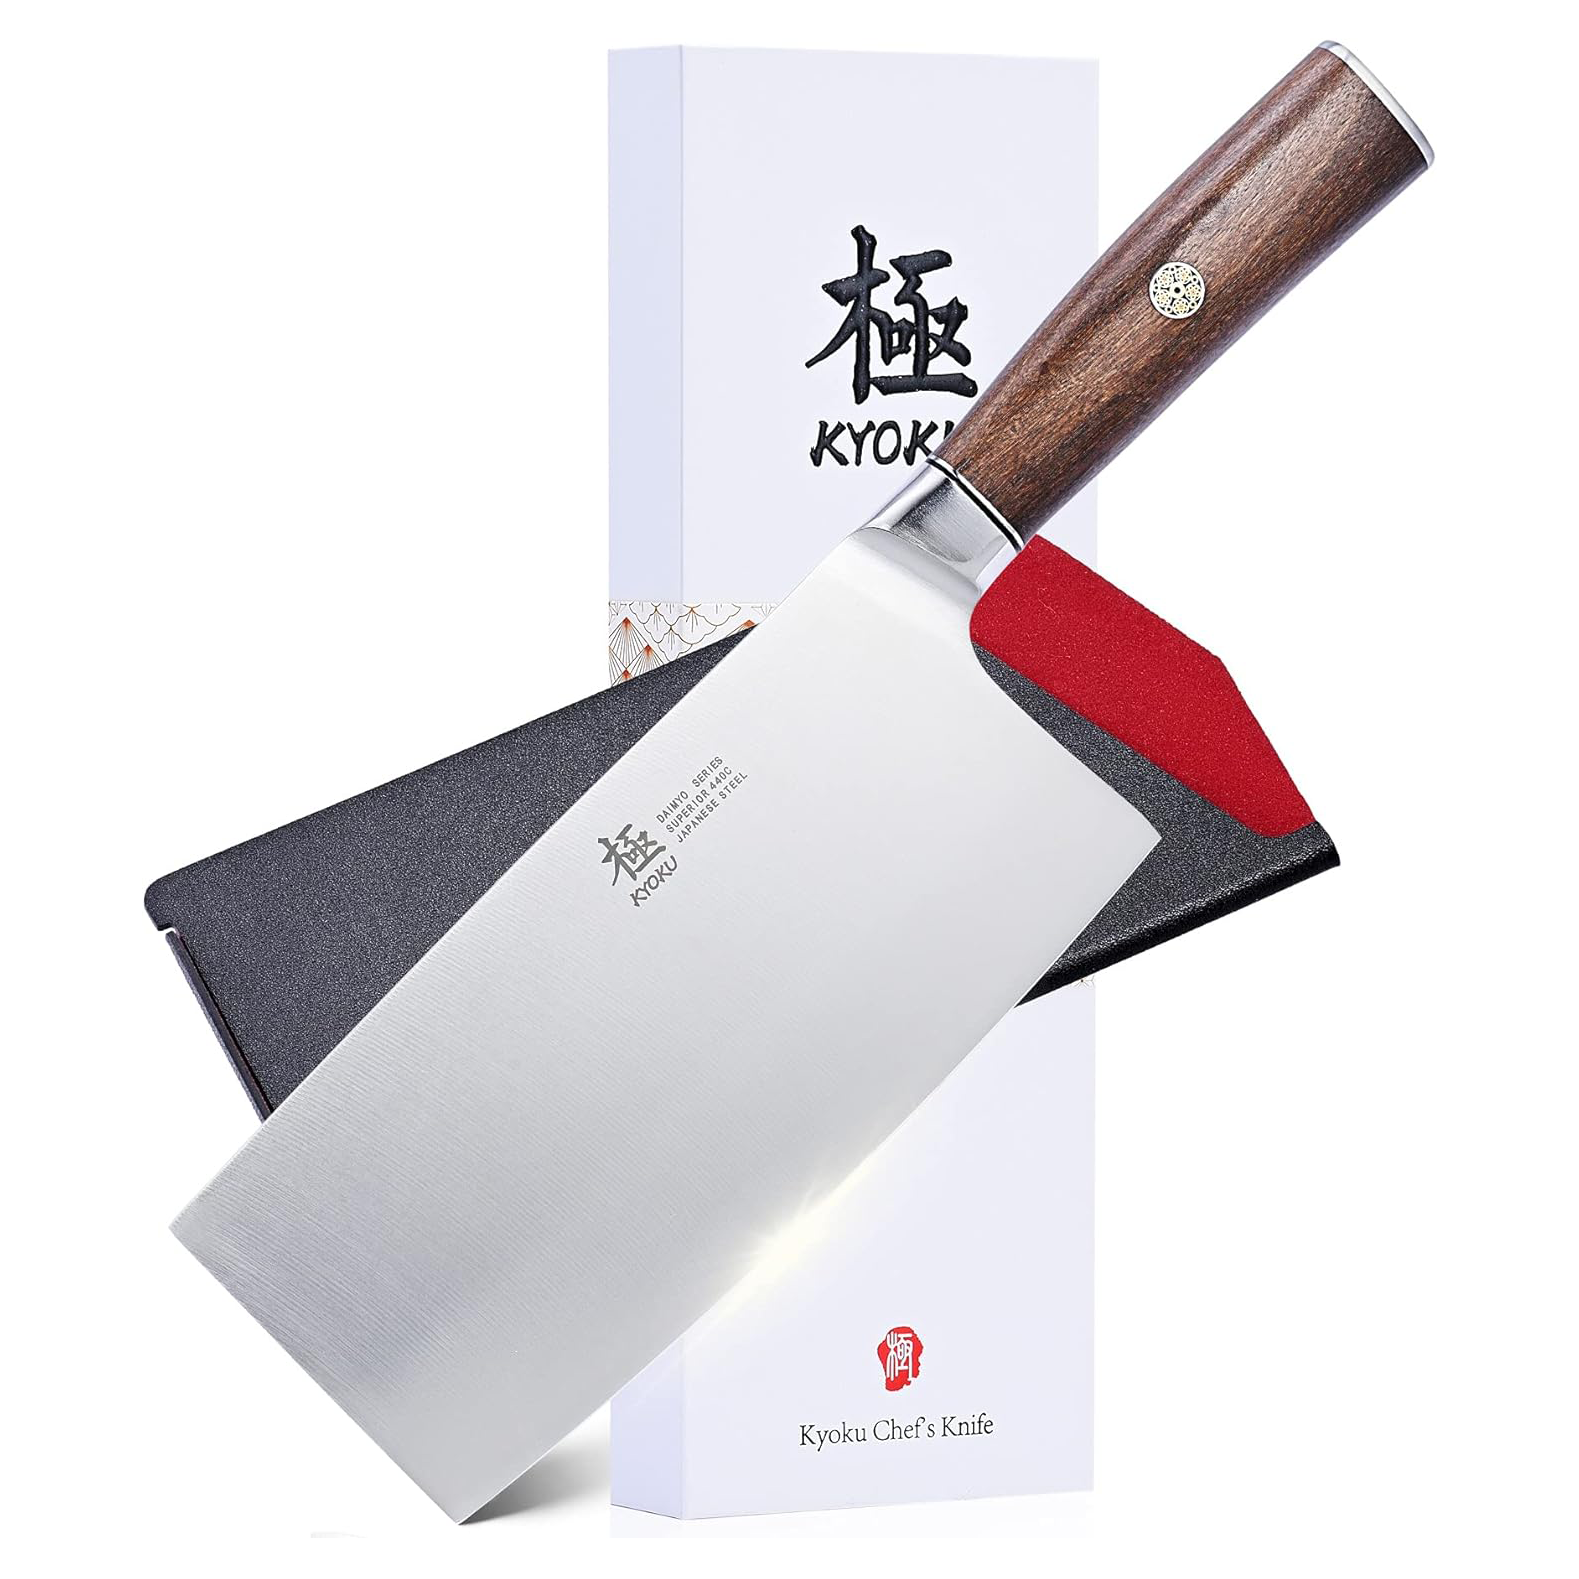 KD 7 Inch Vegetable Cleaver: Japanese 440C Stainless Steel Knife with Rosewood Handle, Mosaic Pin, Sheath, and Case